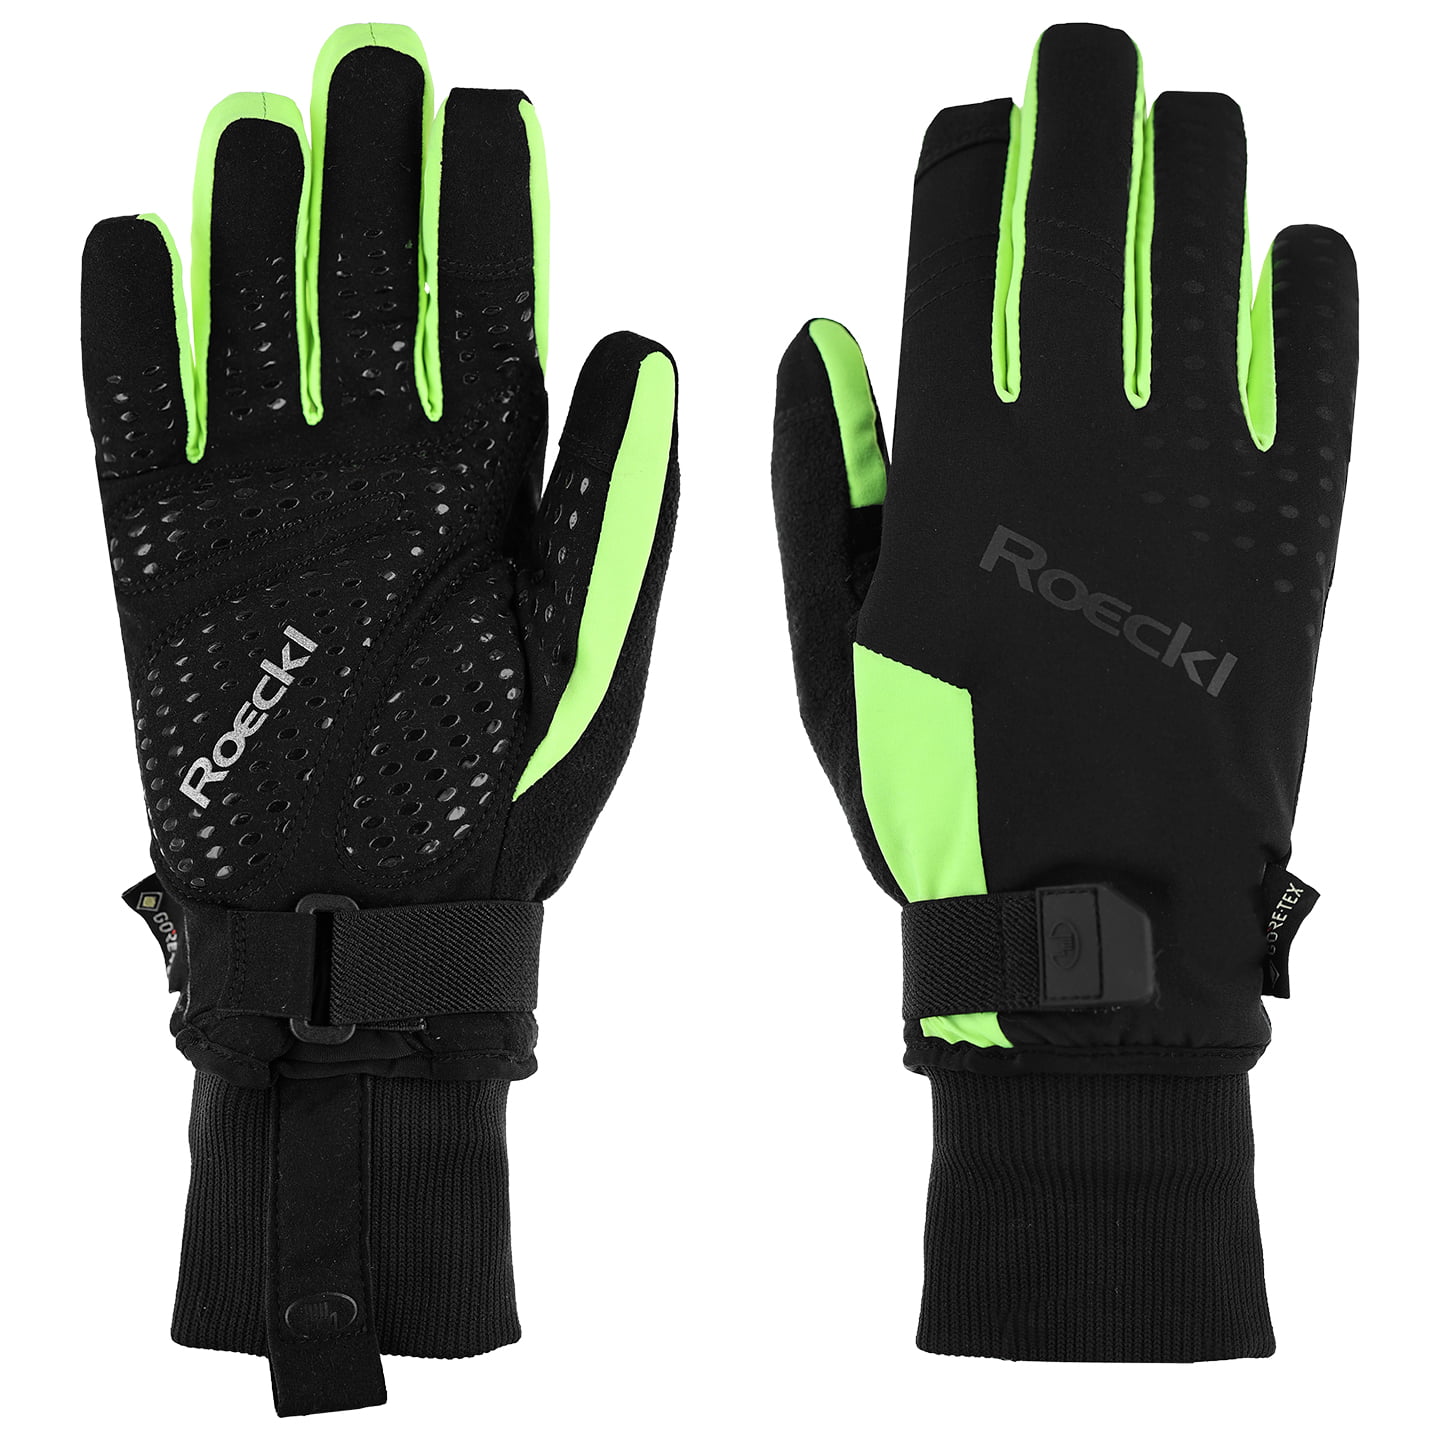 ROECKL Winter Gloves Rocca 2 GTX Winter Cycling Gloves, for men, size 7,5, MTB gloves, MTB clothing